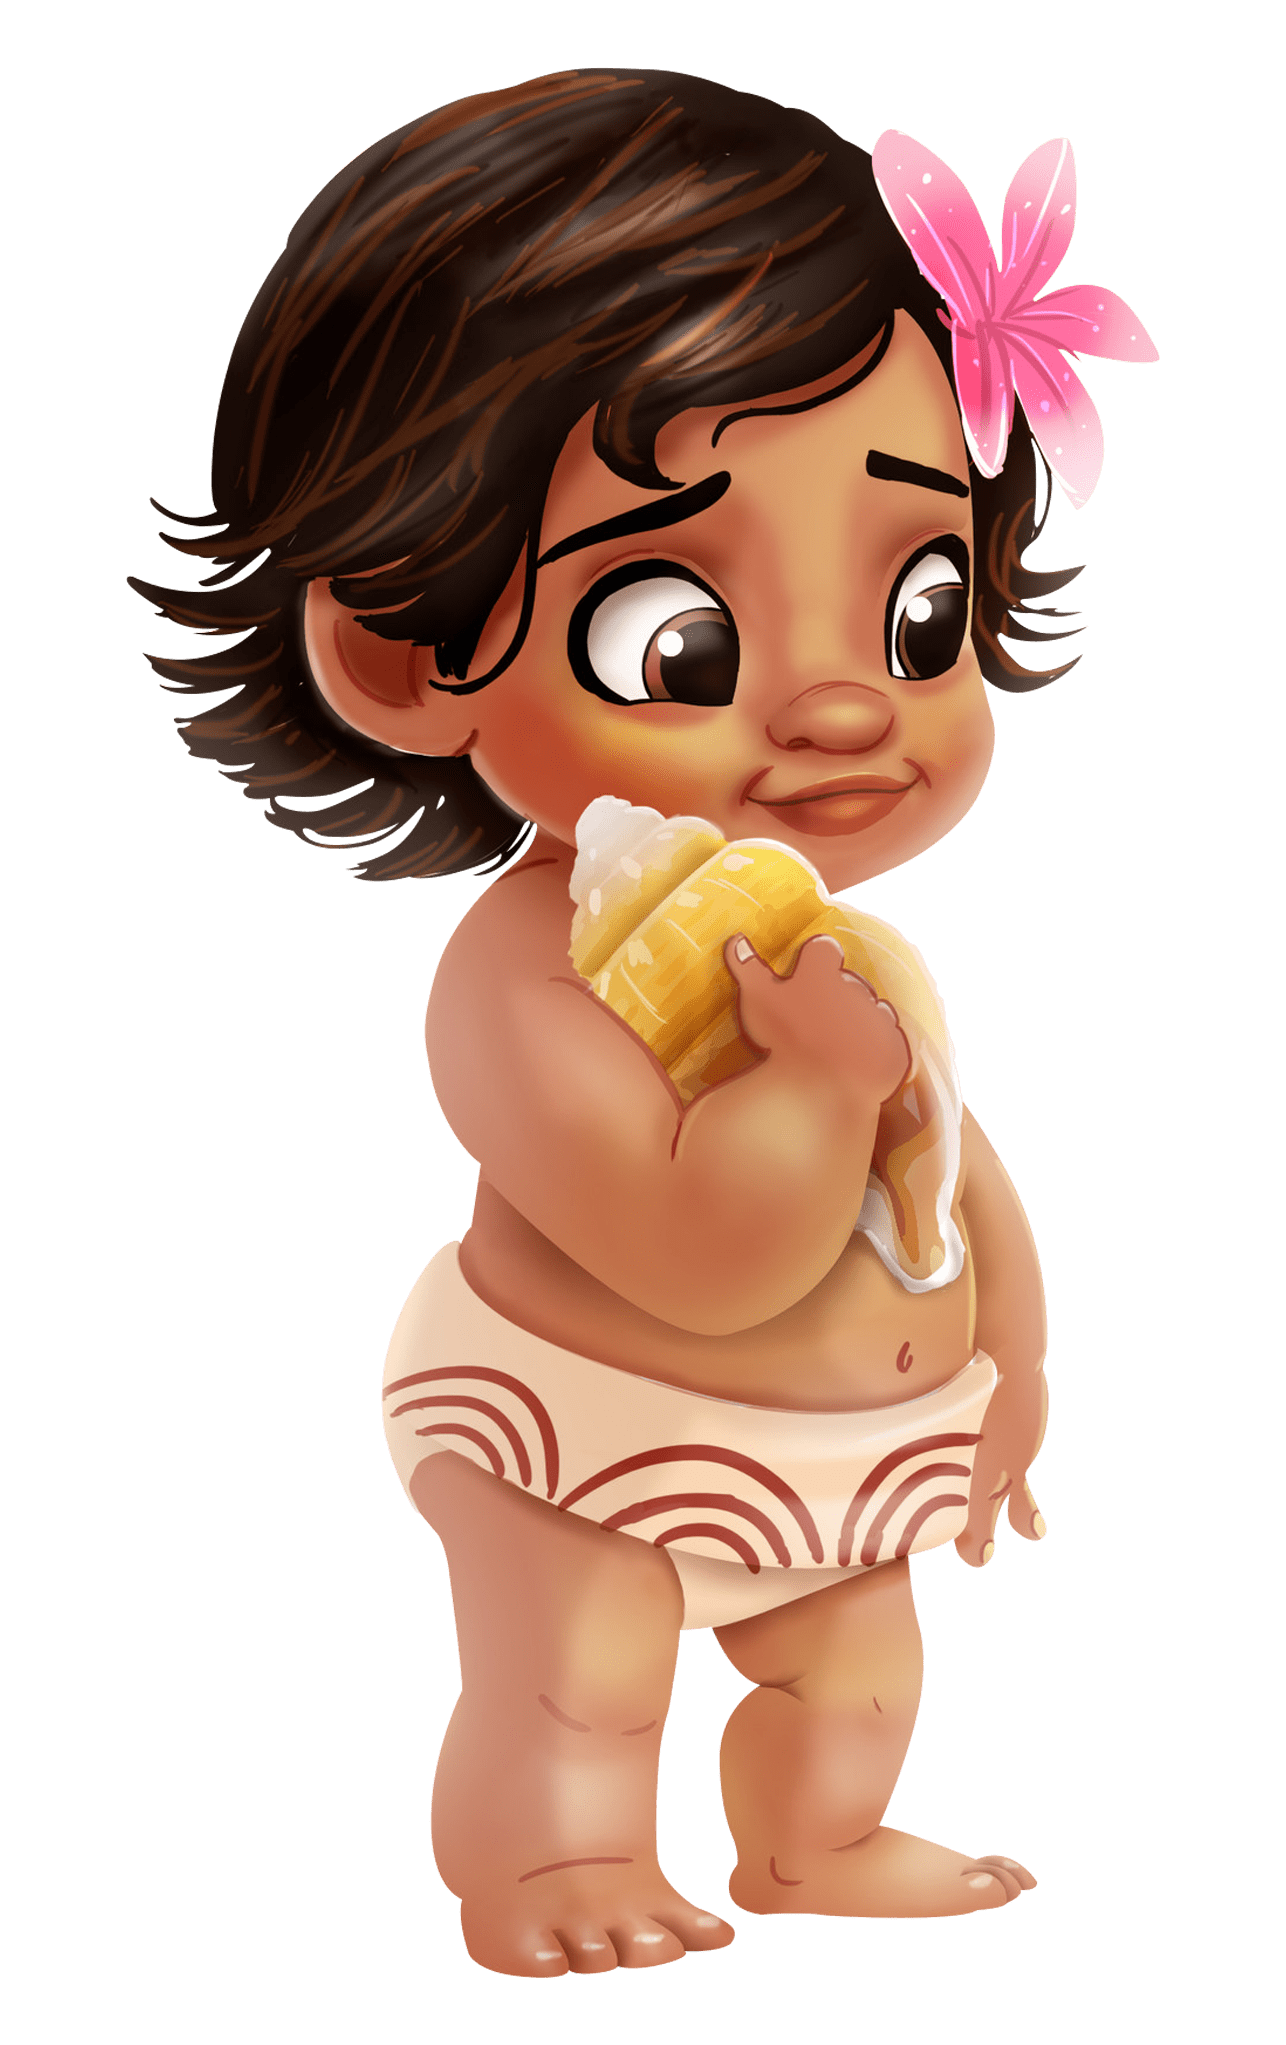 Baby Girl Smiling PNG Image High Quality PNG Image